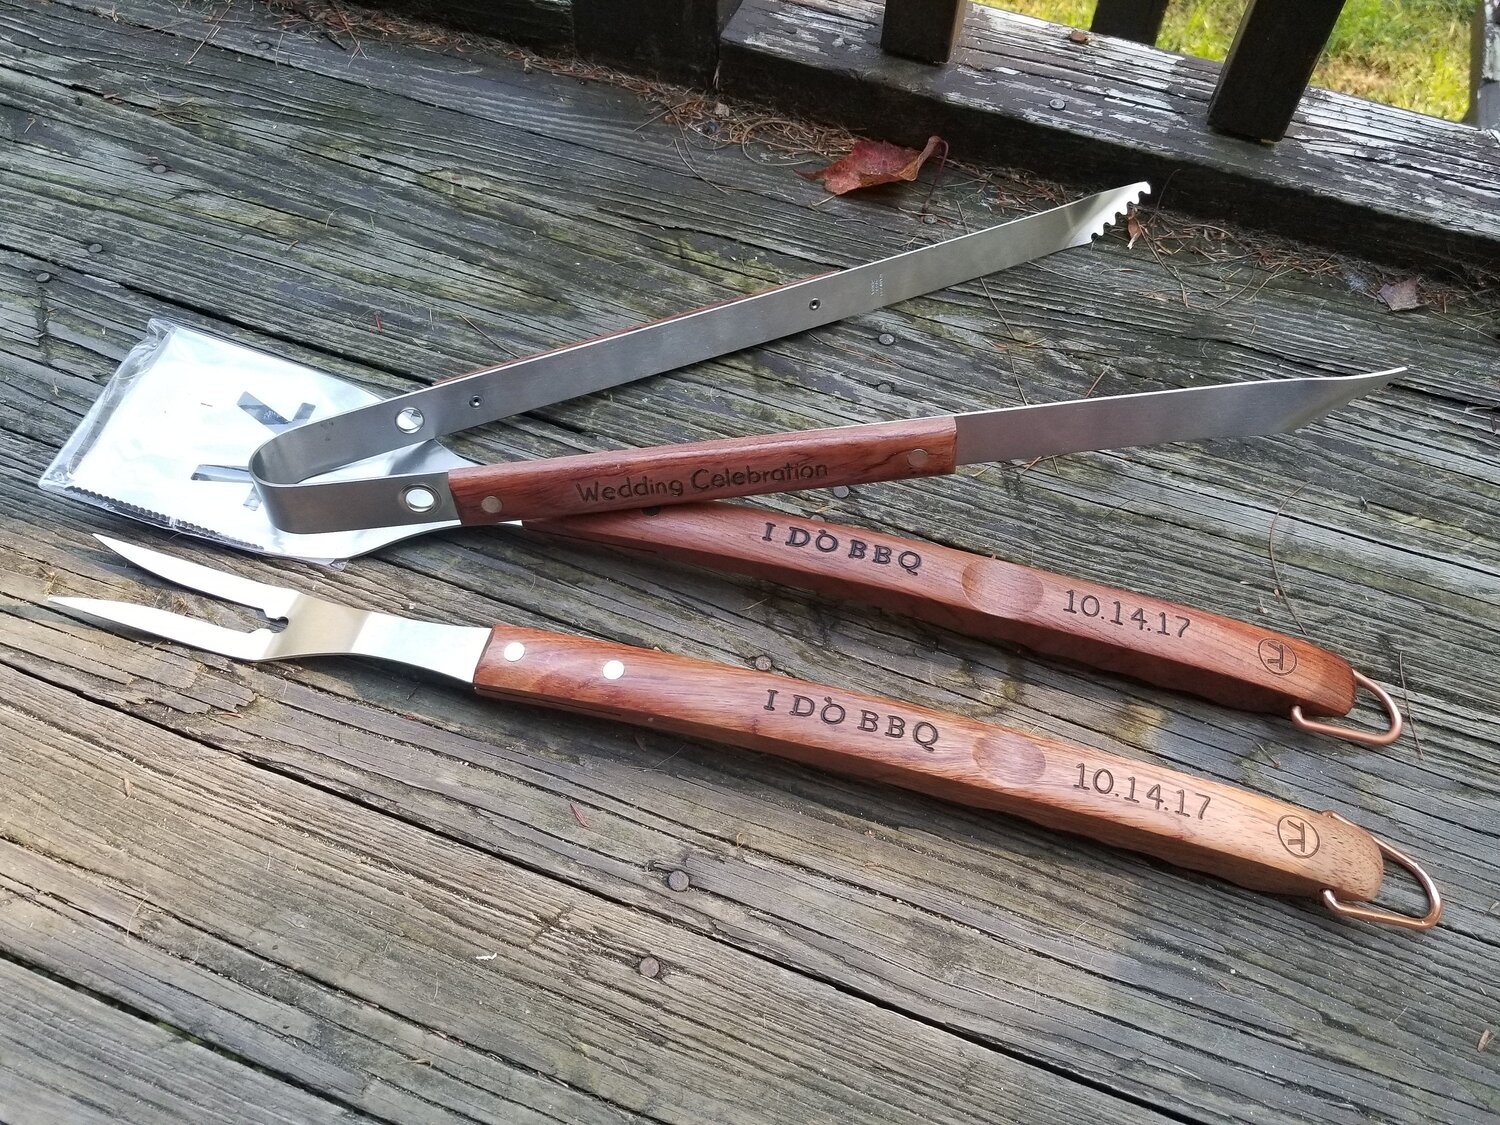 Personalized Grill tool set - Engraved BBQ Tools - Husband Gift